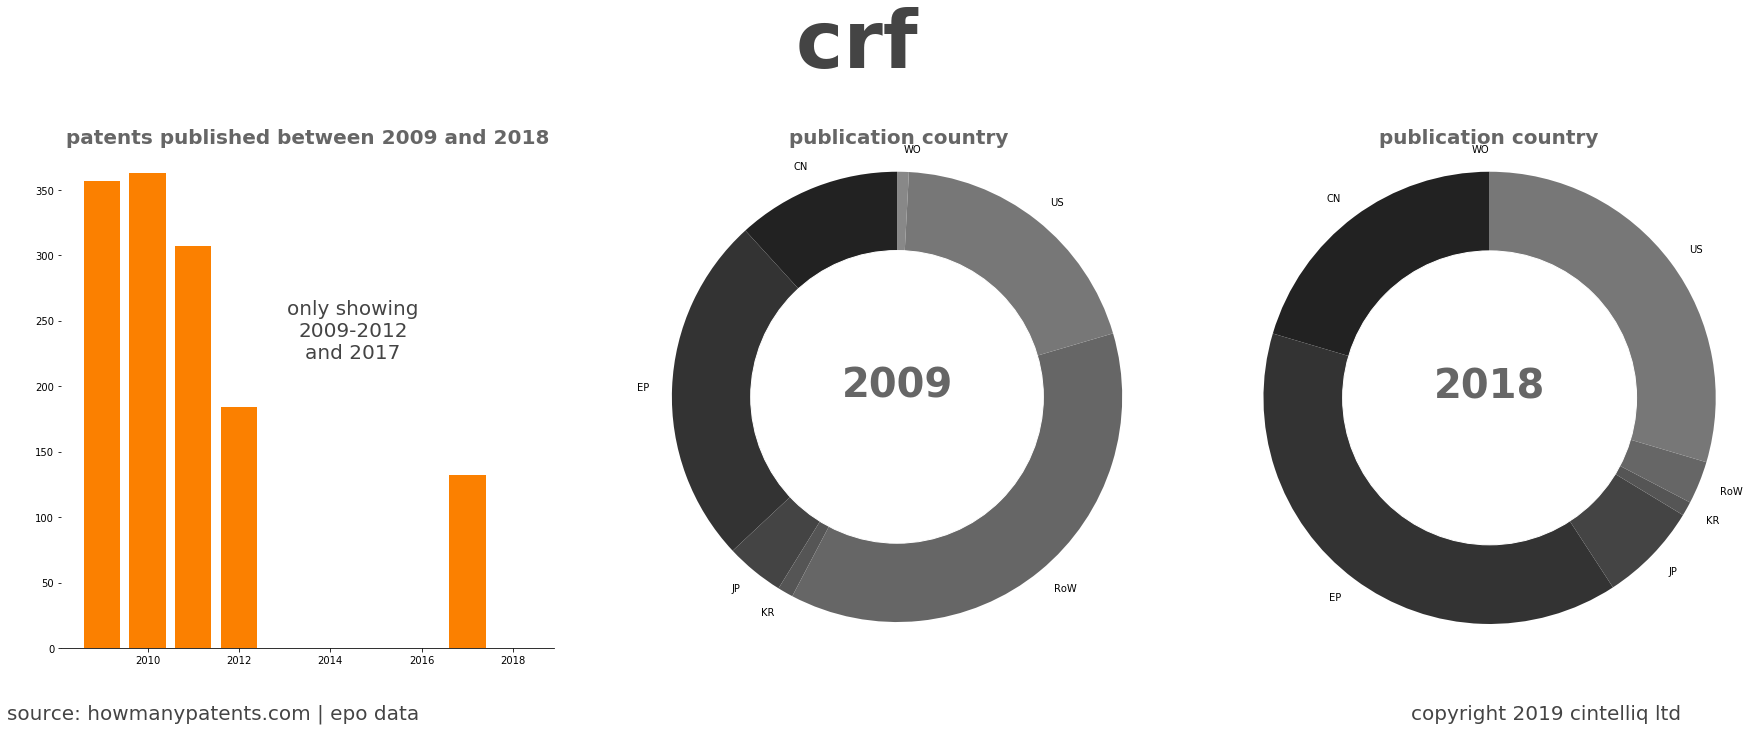 summary of patents for Crf 